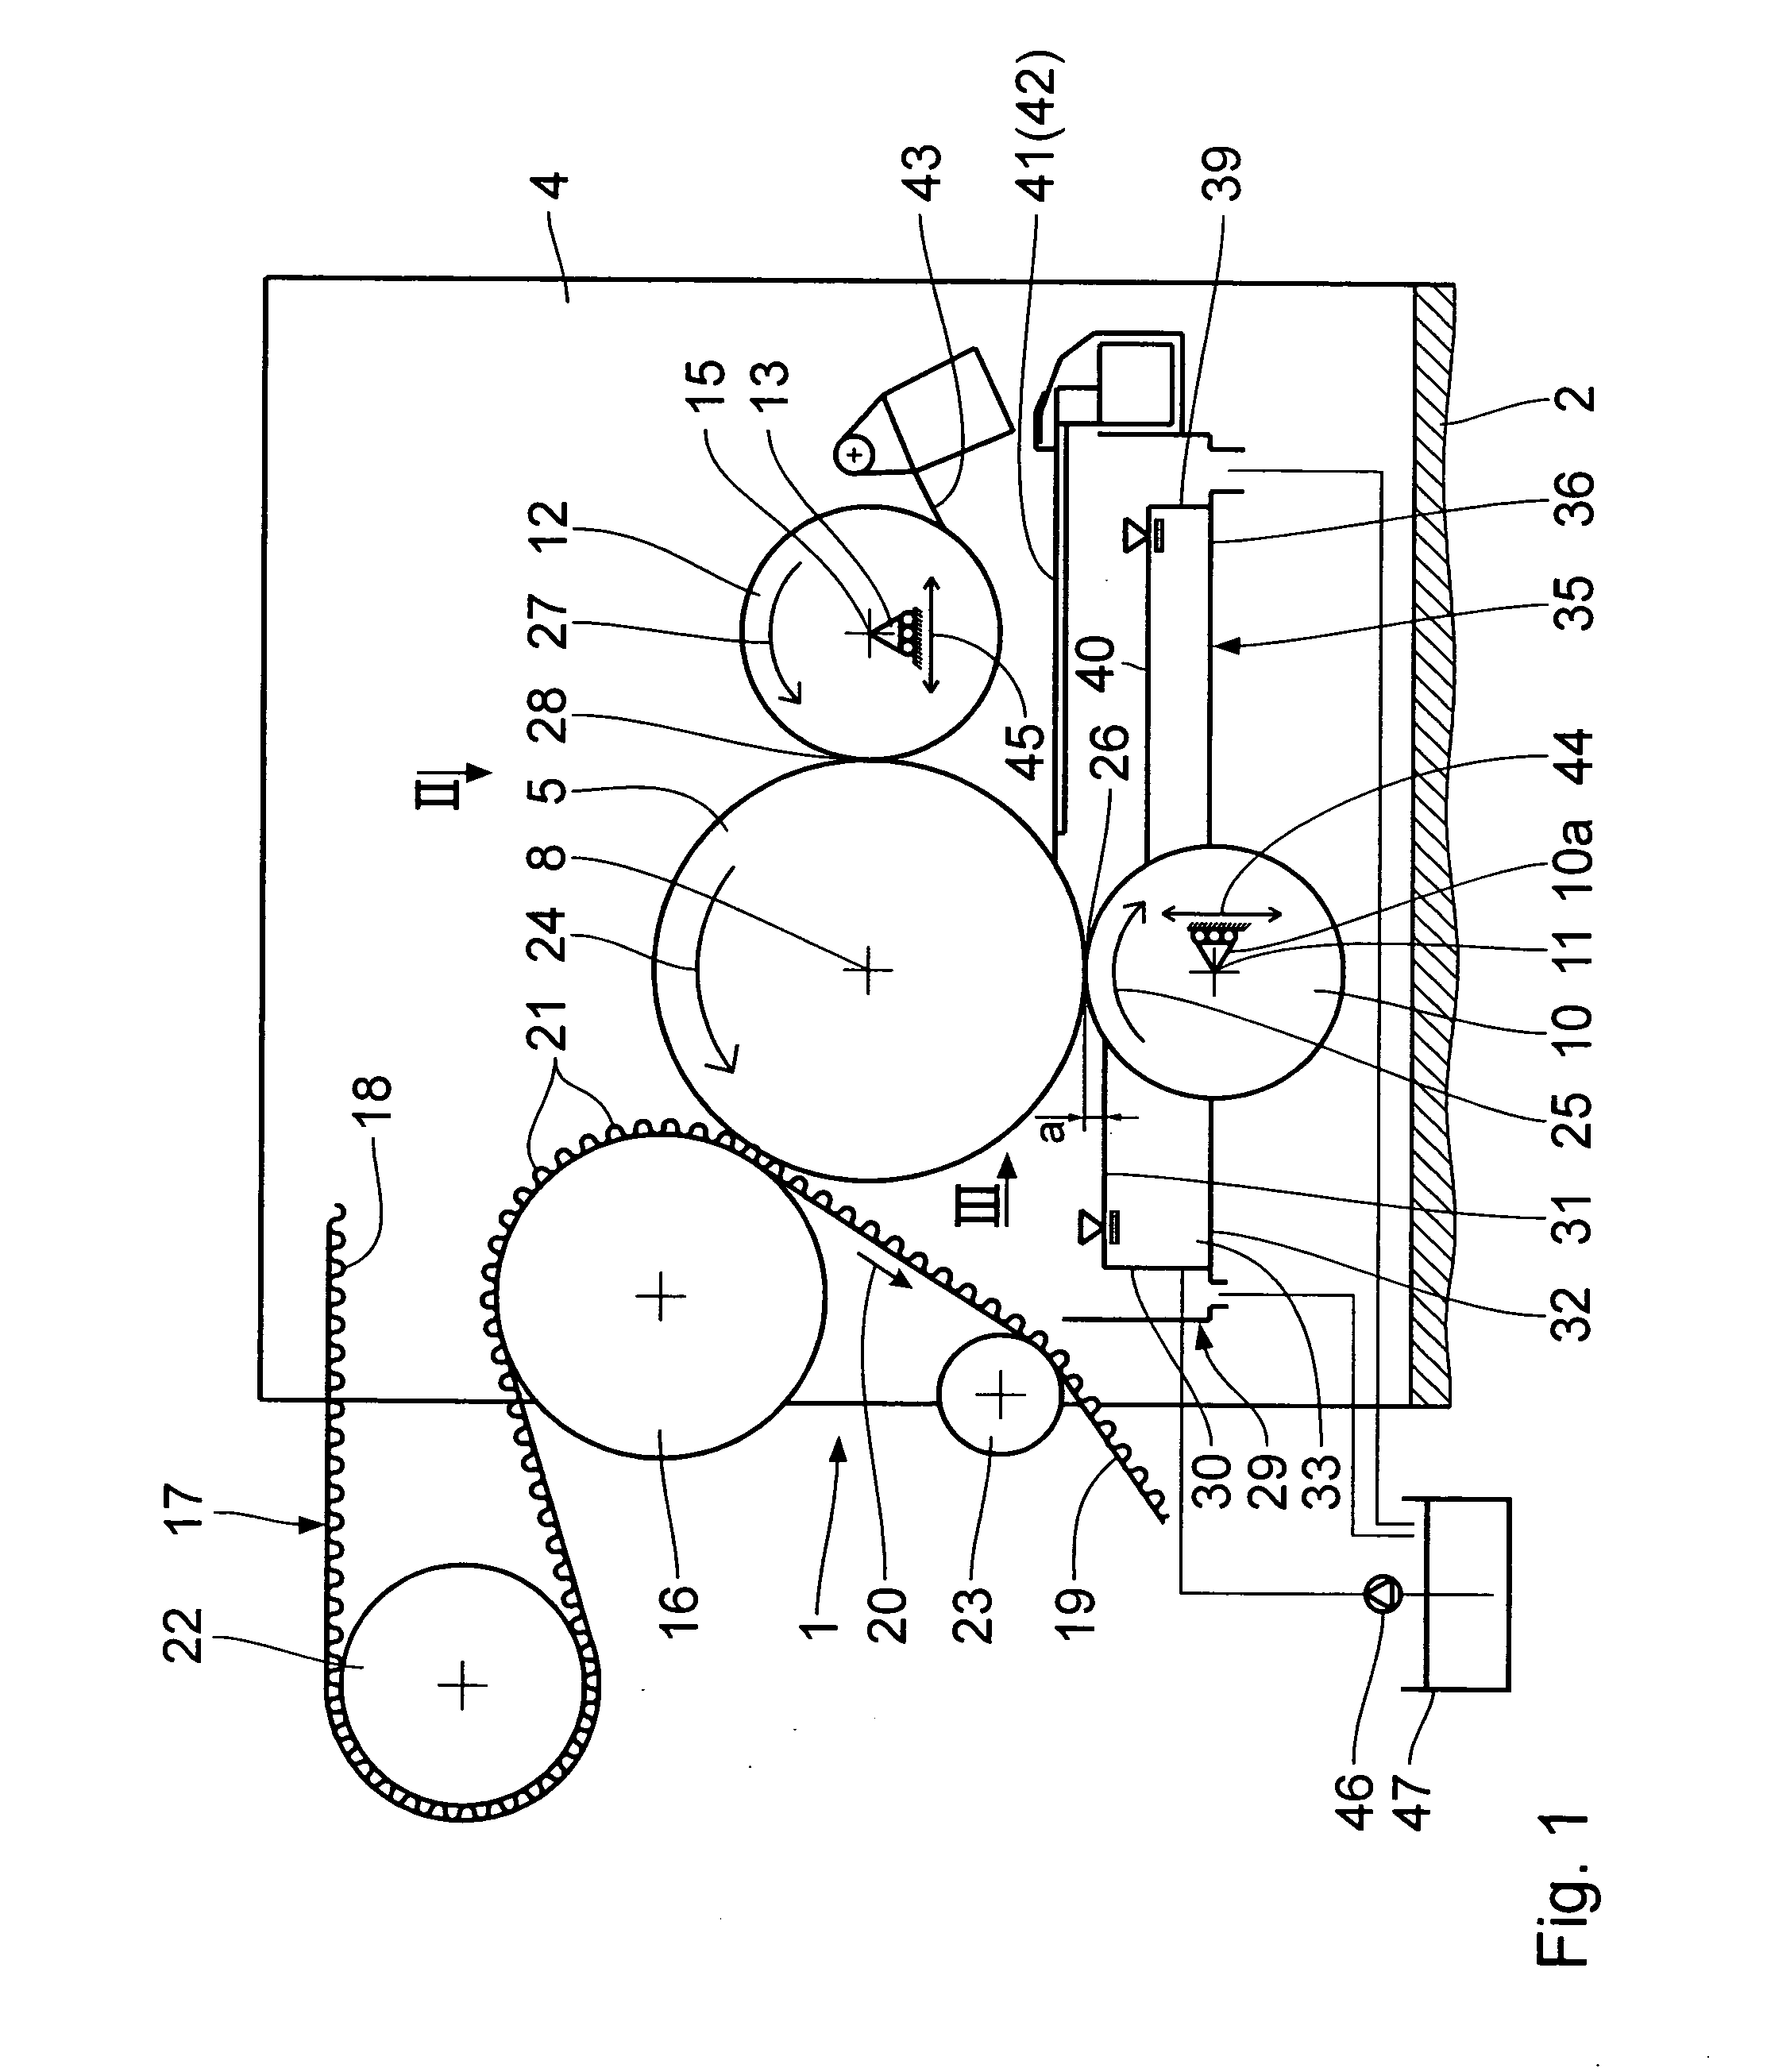 Method and adhesive applicator unit for continuous application of adhesive to webs